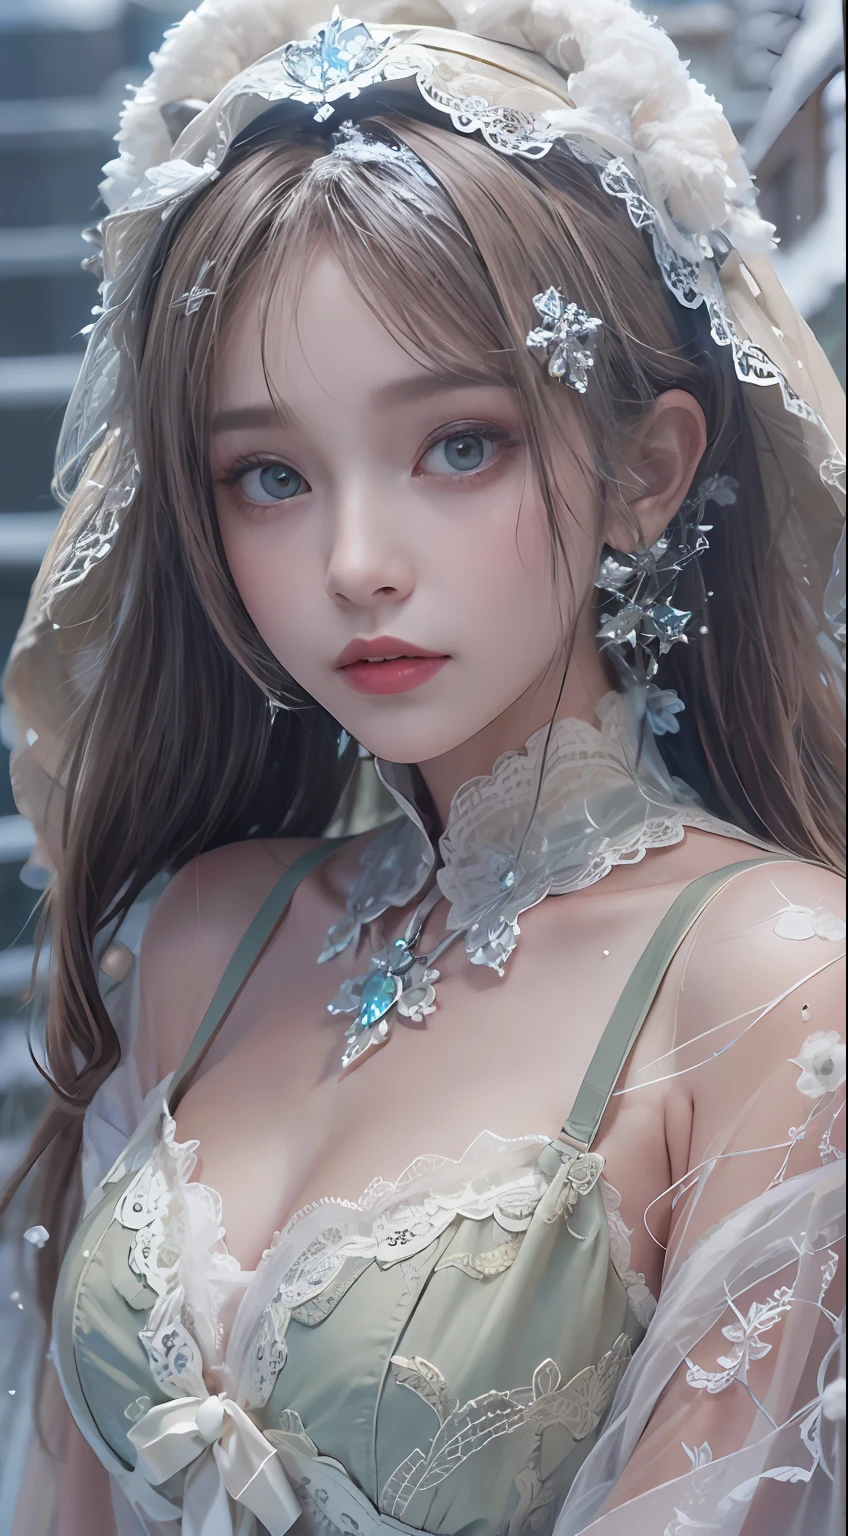 （8K， RAW photos， best qualtiy， tmasterpiece：1.2），（realisticlying， photograph realistic：1.4)，Hide your face with sadness，
Lolita costume，Lace， Aerith Gainsborough， The upper part of the body， undergarments，exposed bare shoulders， do lado de fora， (outside，Covered with snow，cloaks，) high high quality， Adobe Lightroom， highdetailskin， looking at viewert，